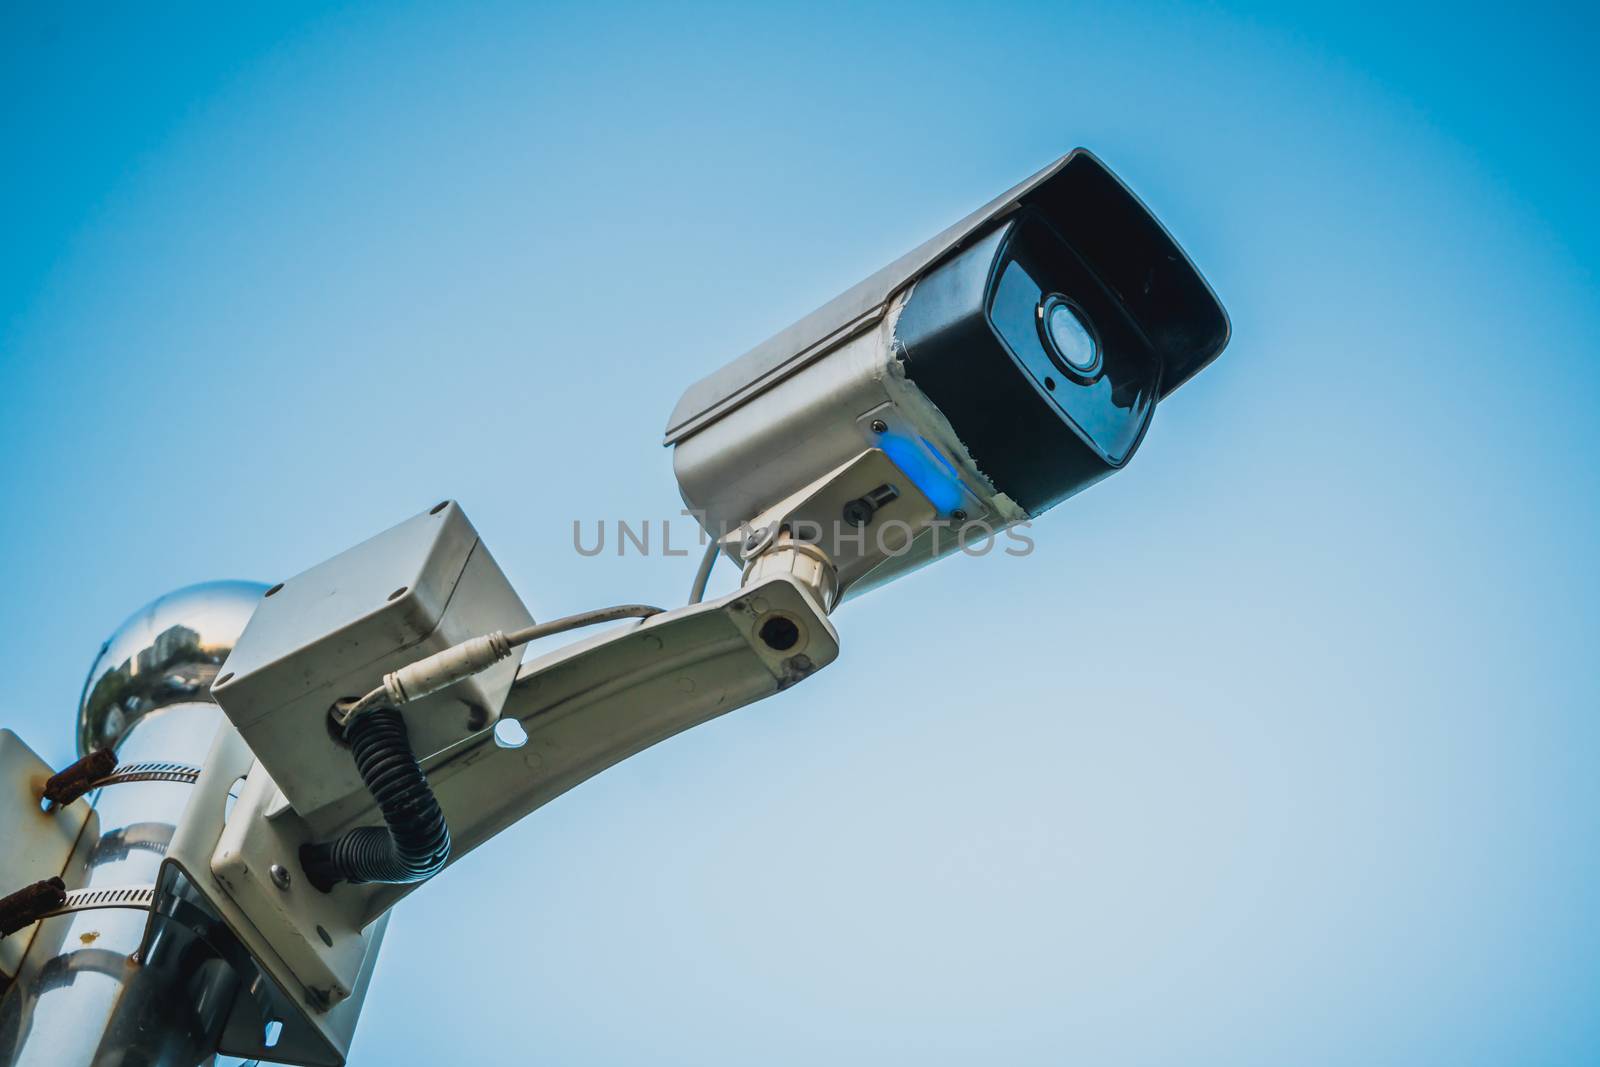 Outdoor security CCTV mornitor with blue sky background